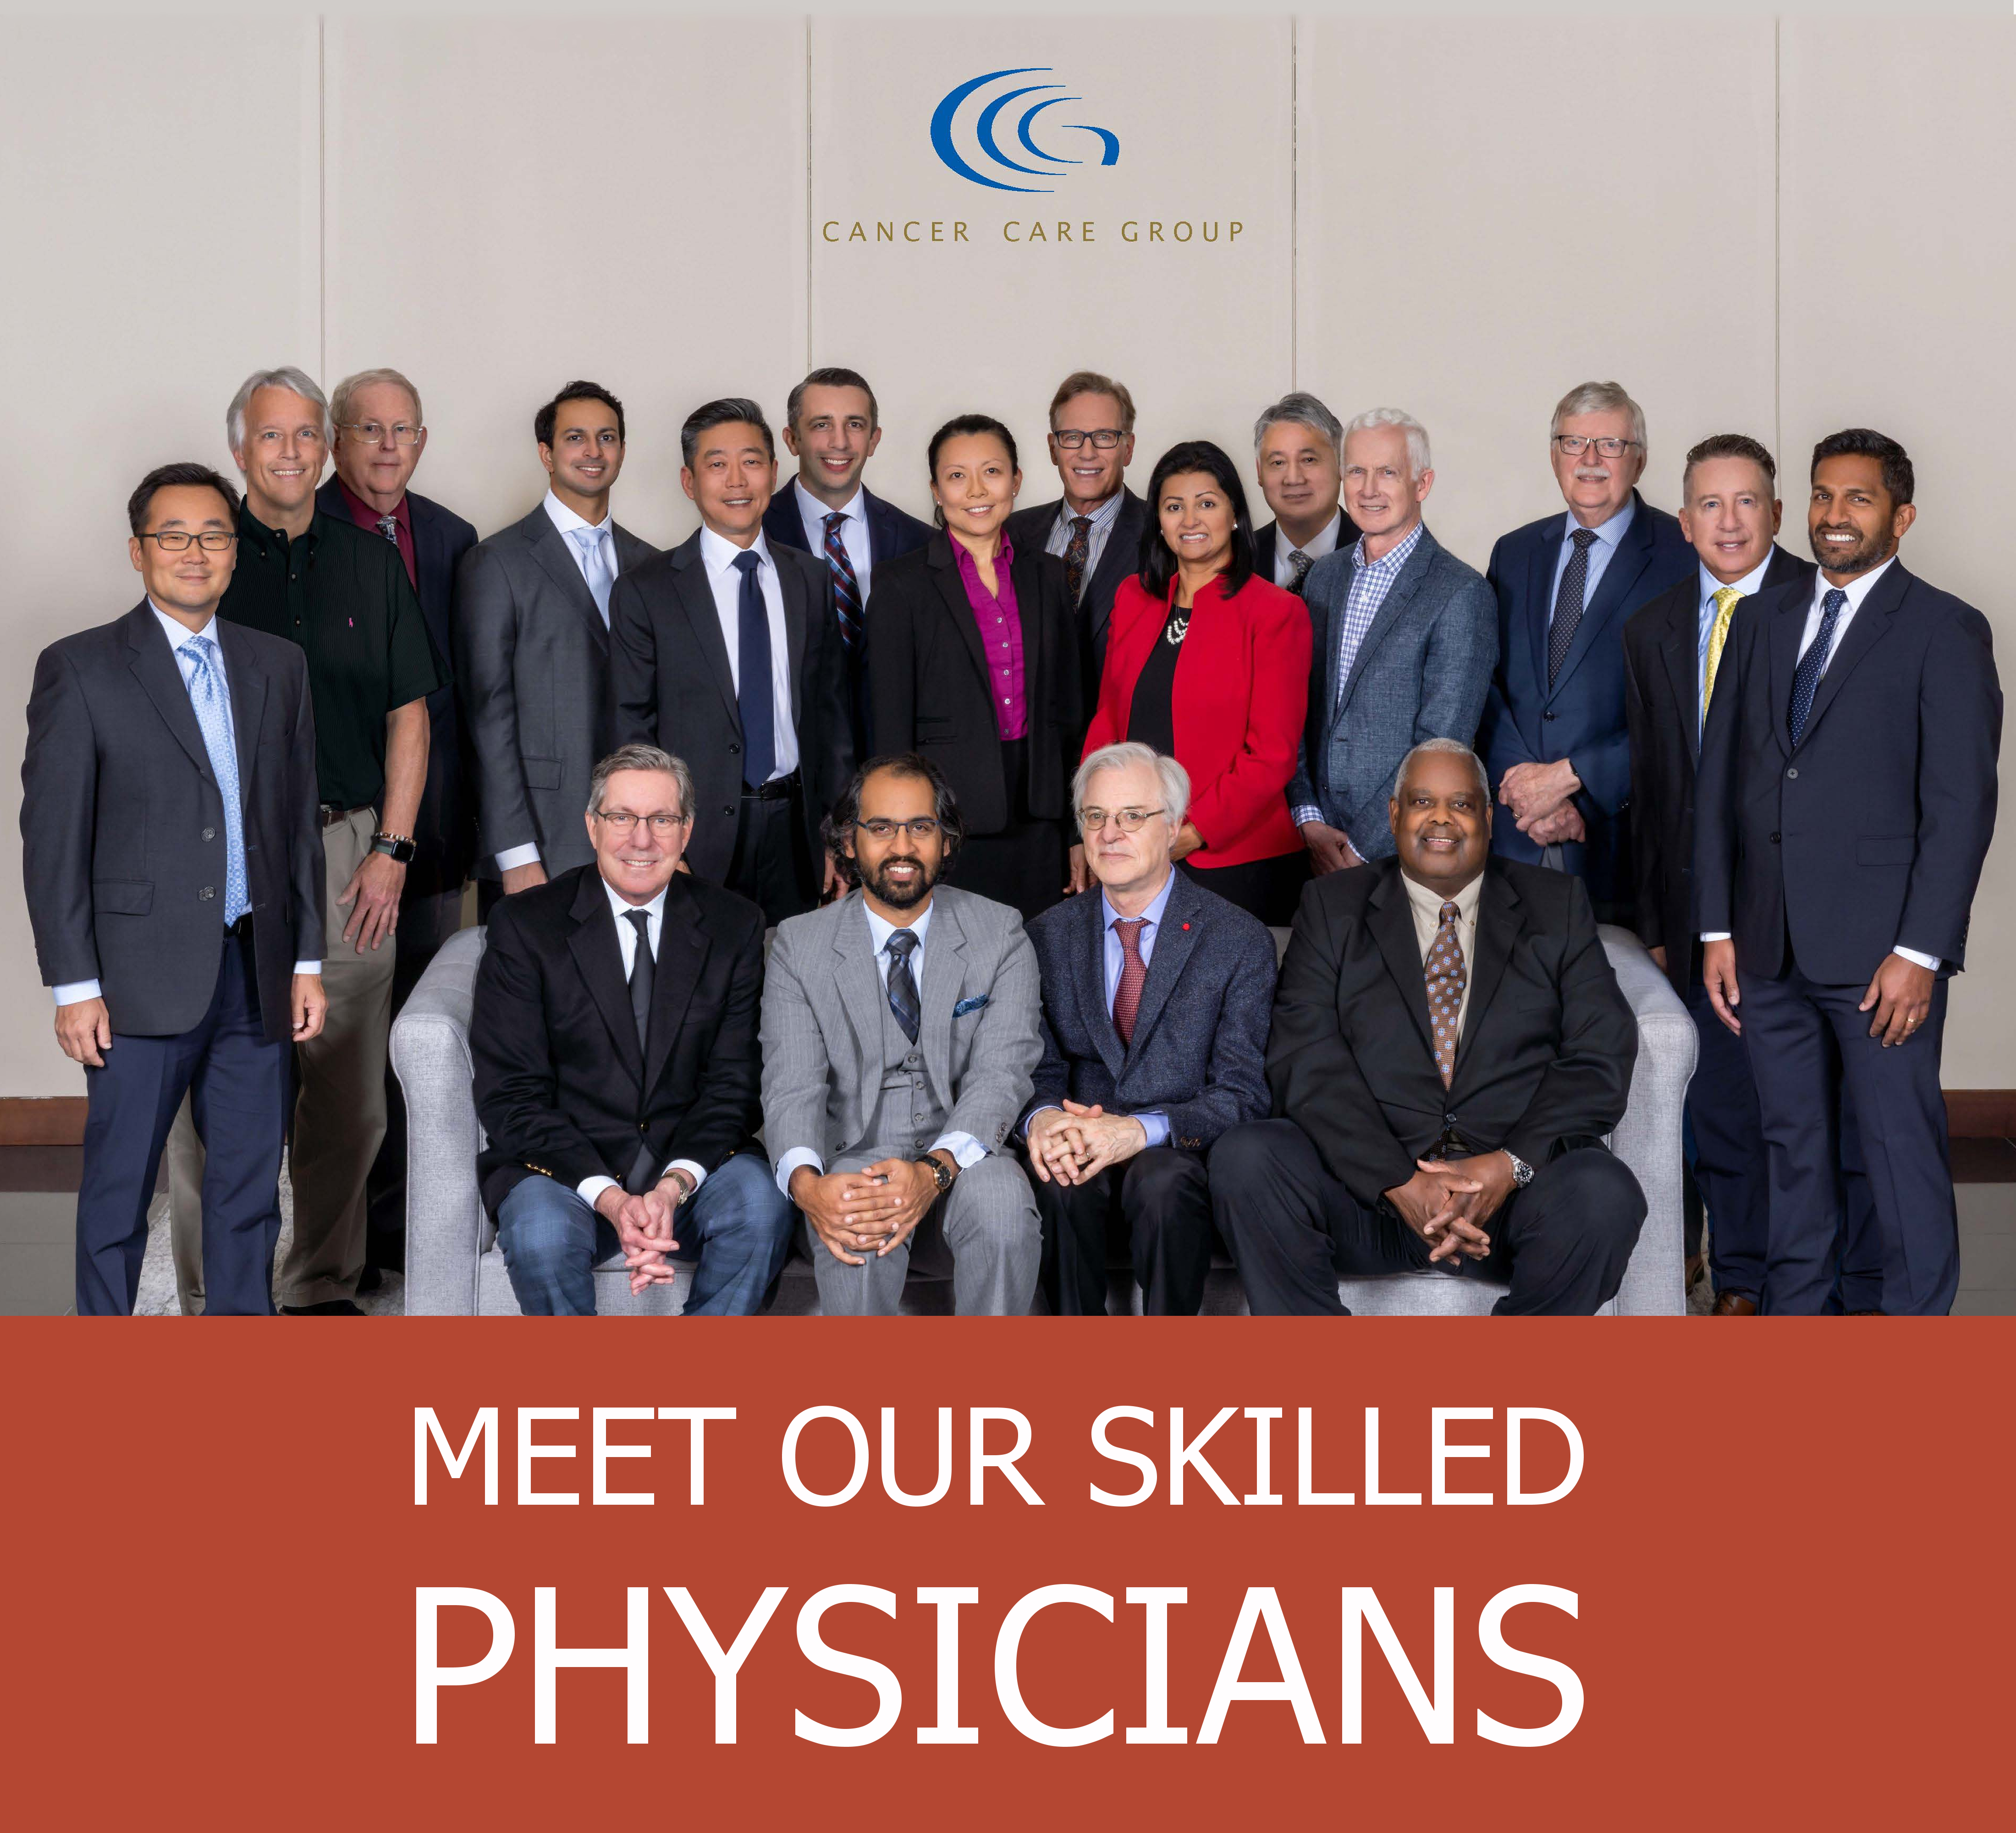 Meet our skilled physicians